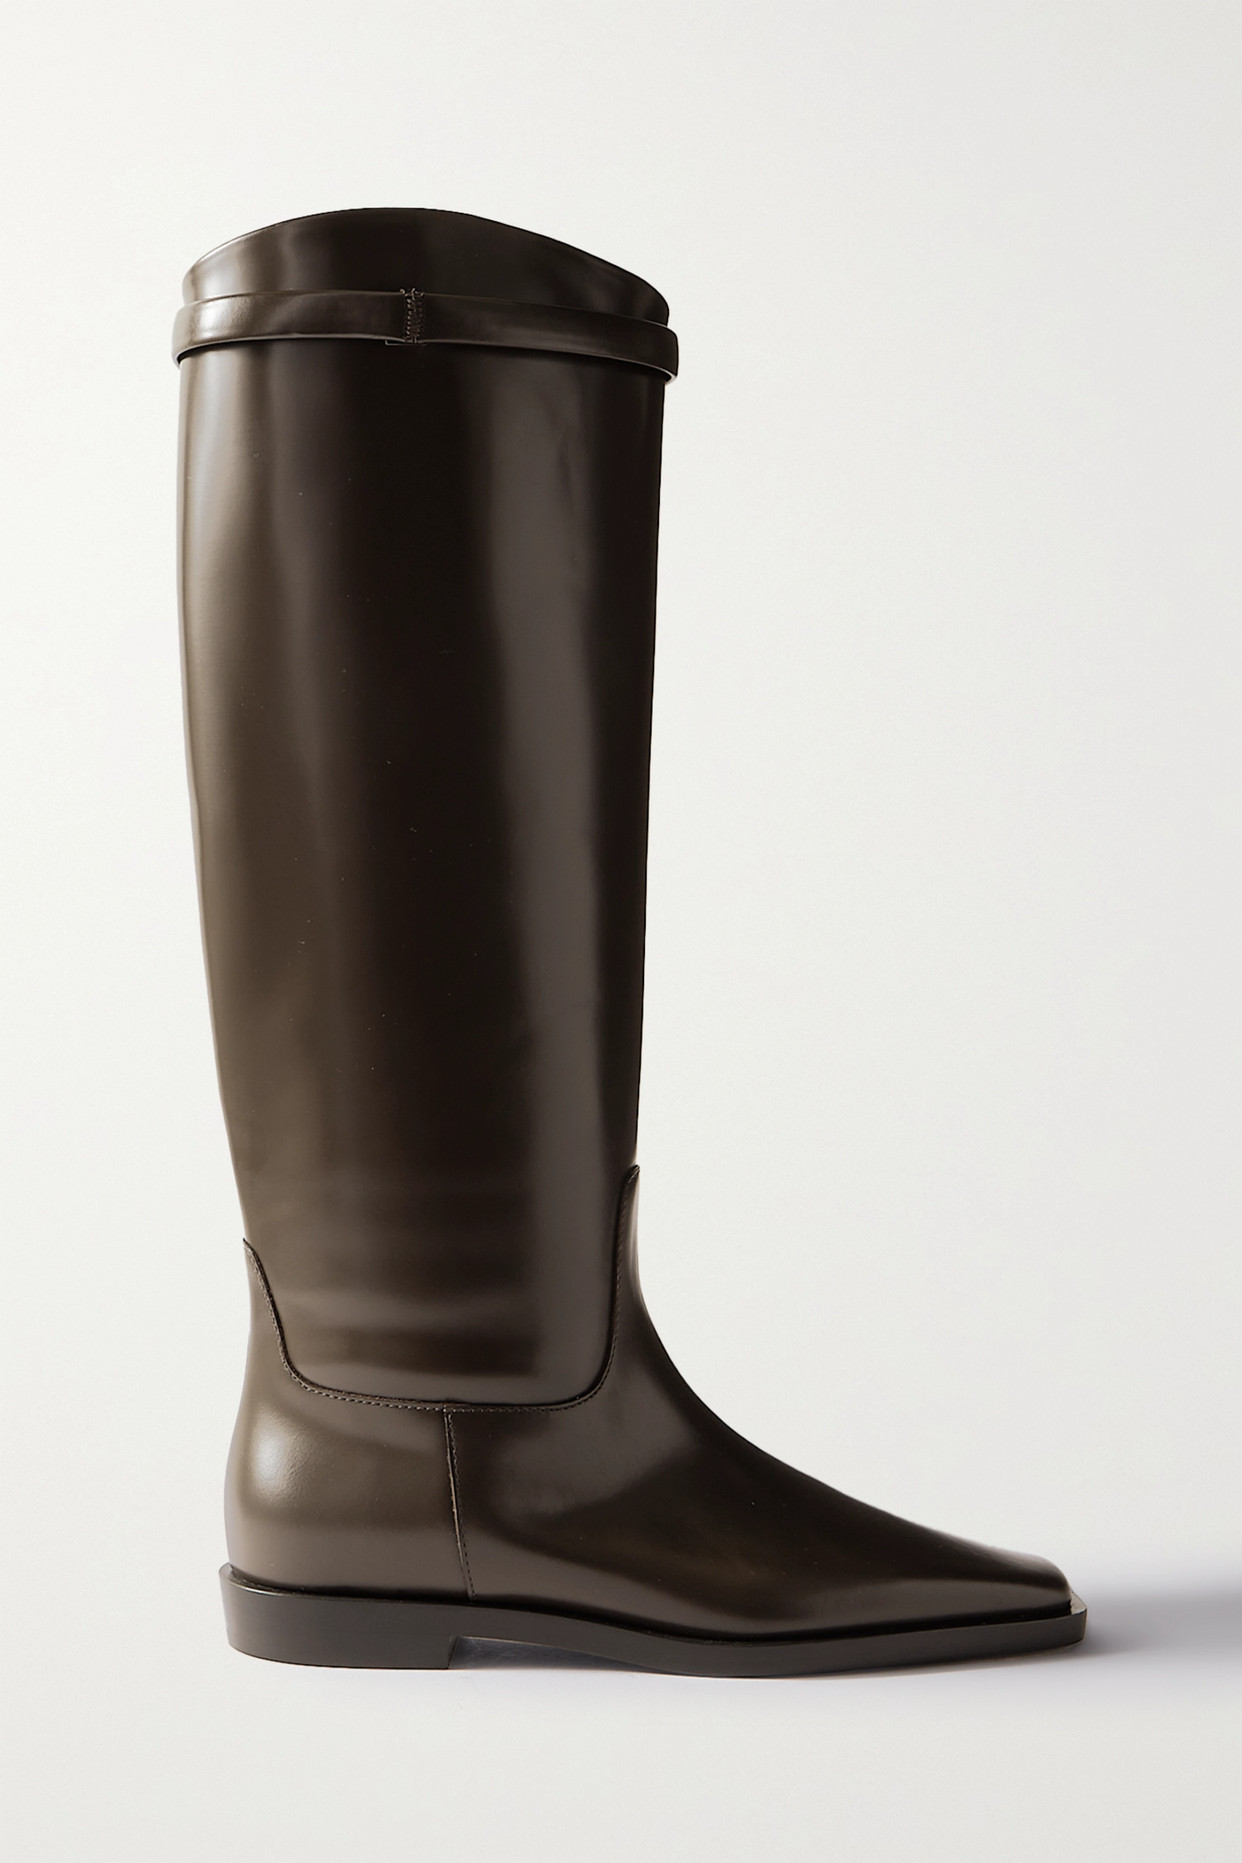 + Net Sustain the Riding Leather Knee Boots